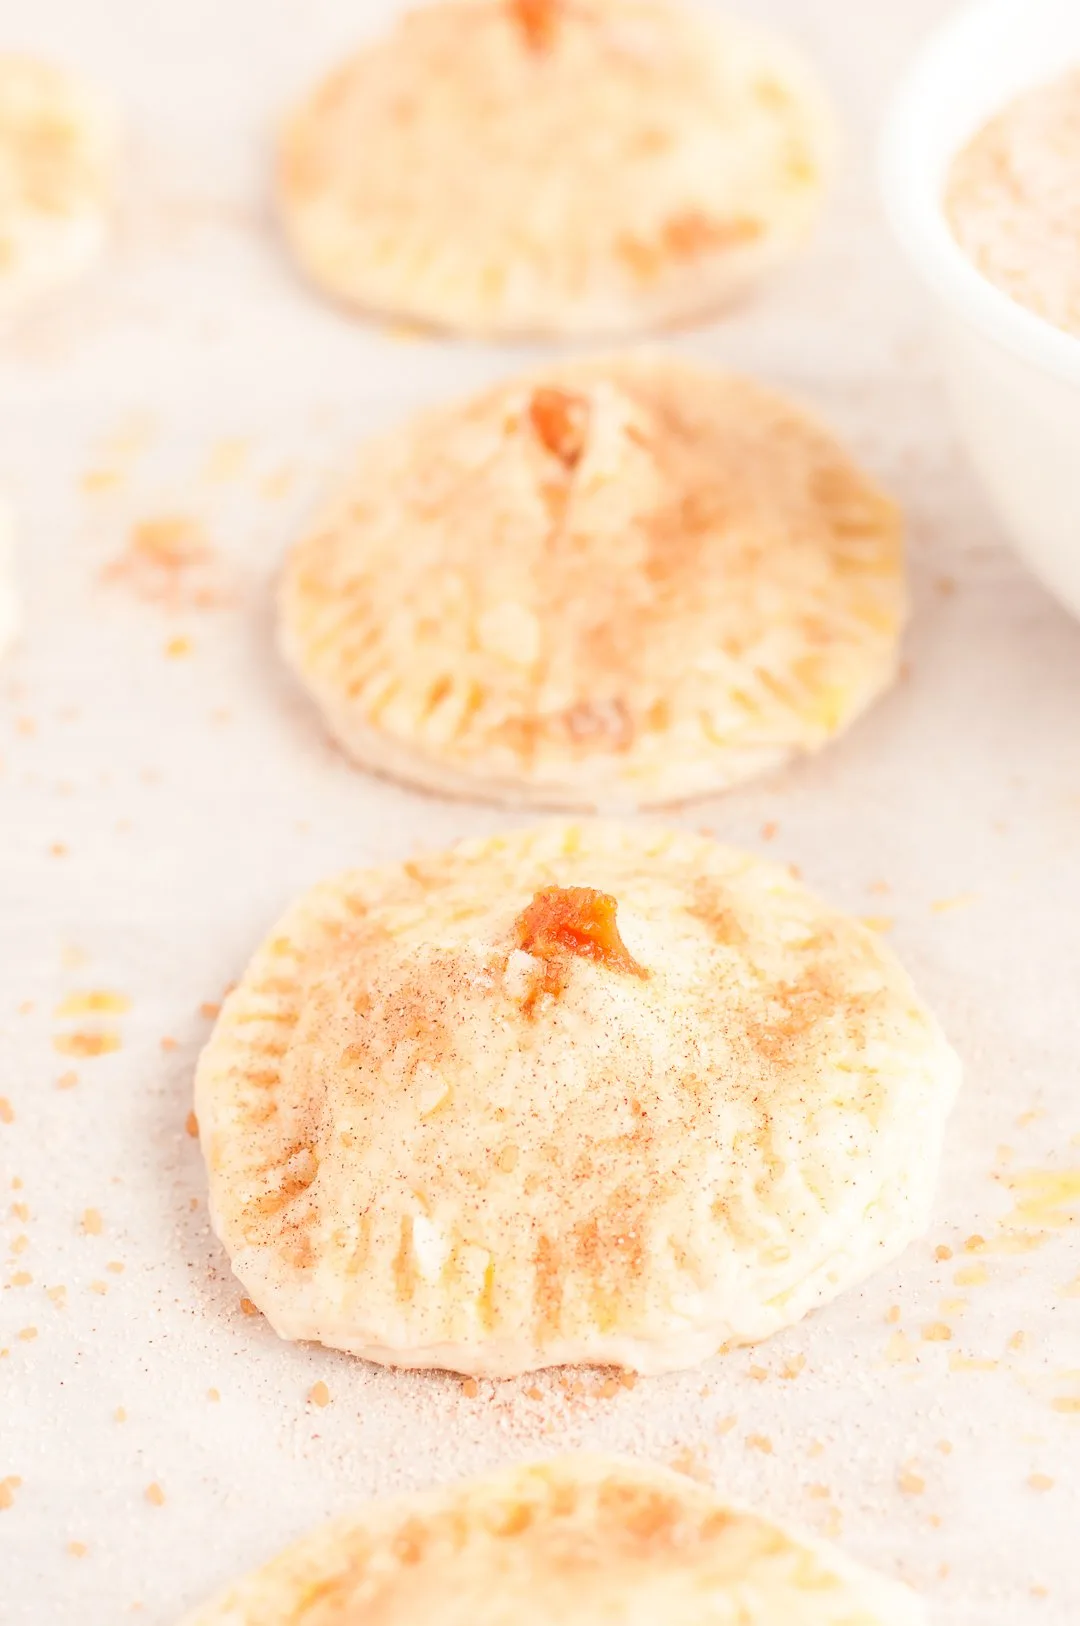 adding sugar and spice blend to mini pies